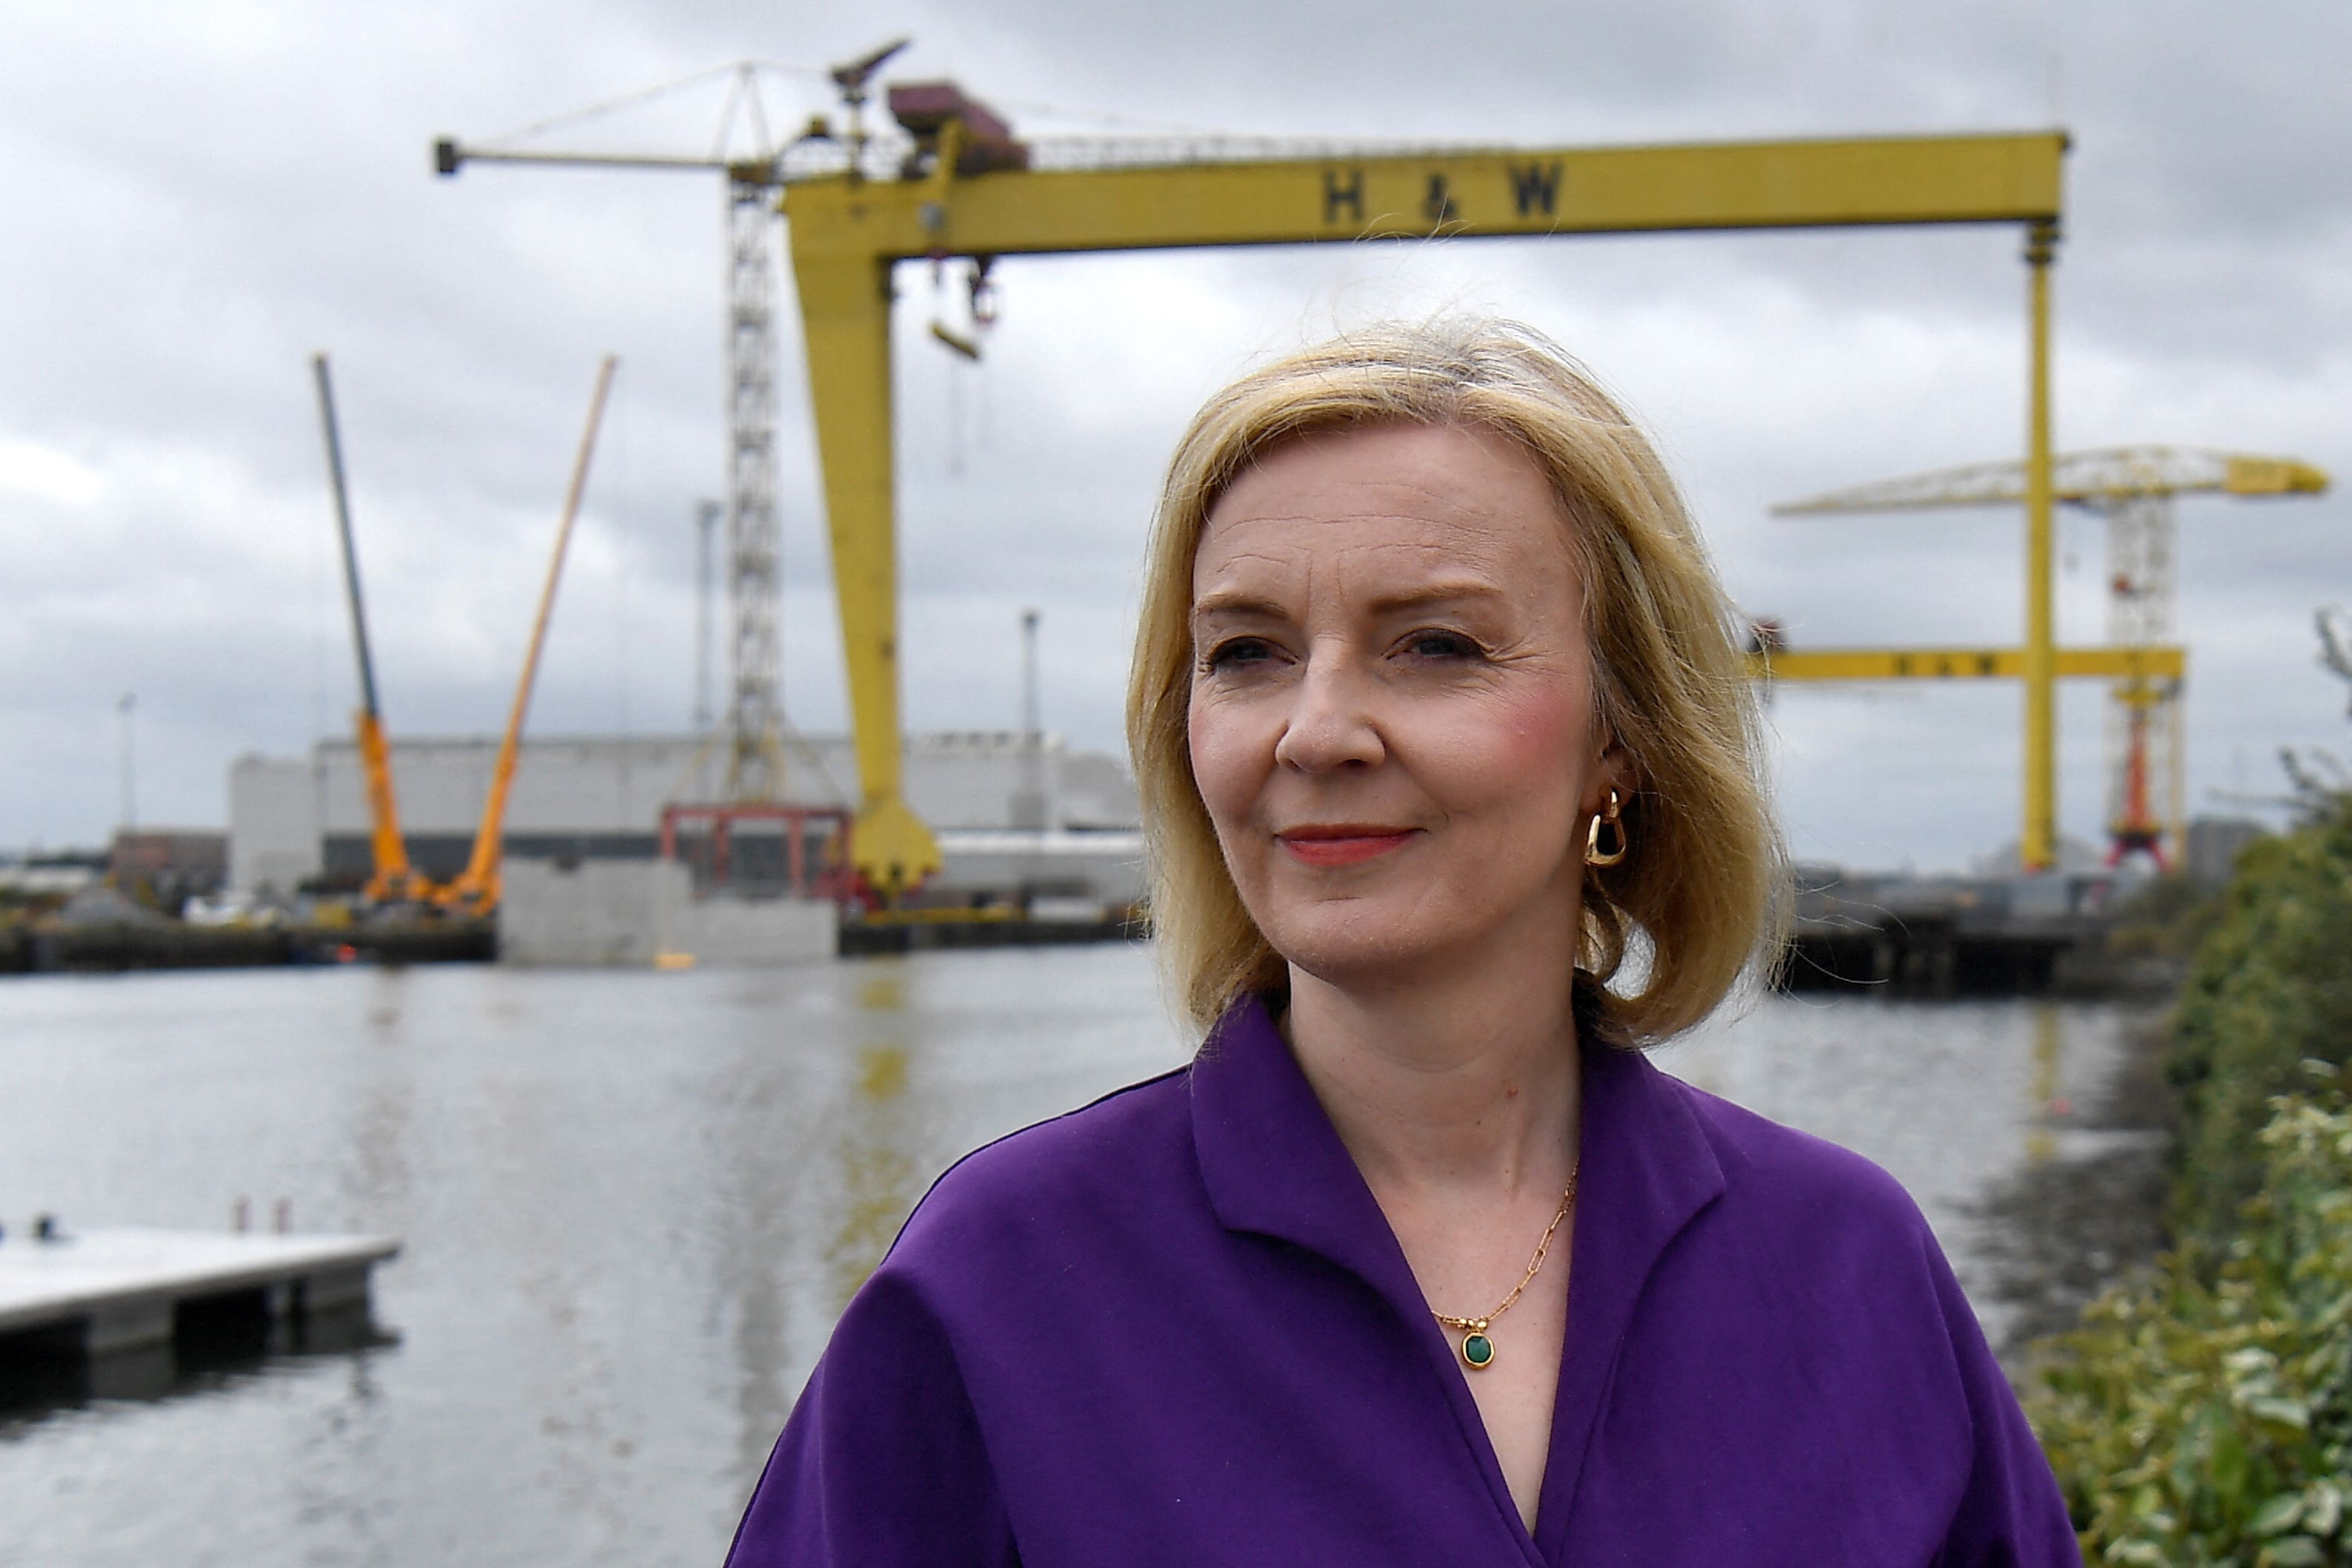 Liz Truss during a campaign visit to the maritime engineering company in Belfast Harbour, as part of her campaign to be leader of the Conservative Party and the next prime minister. Picture date: Wednesday August 17, 2022.